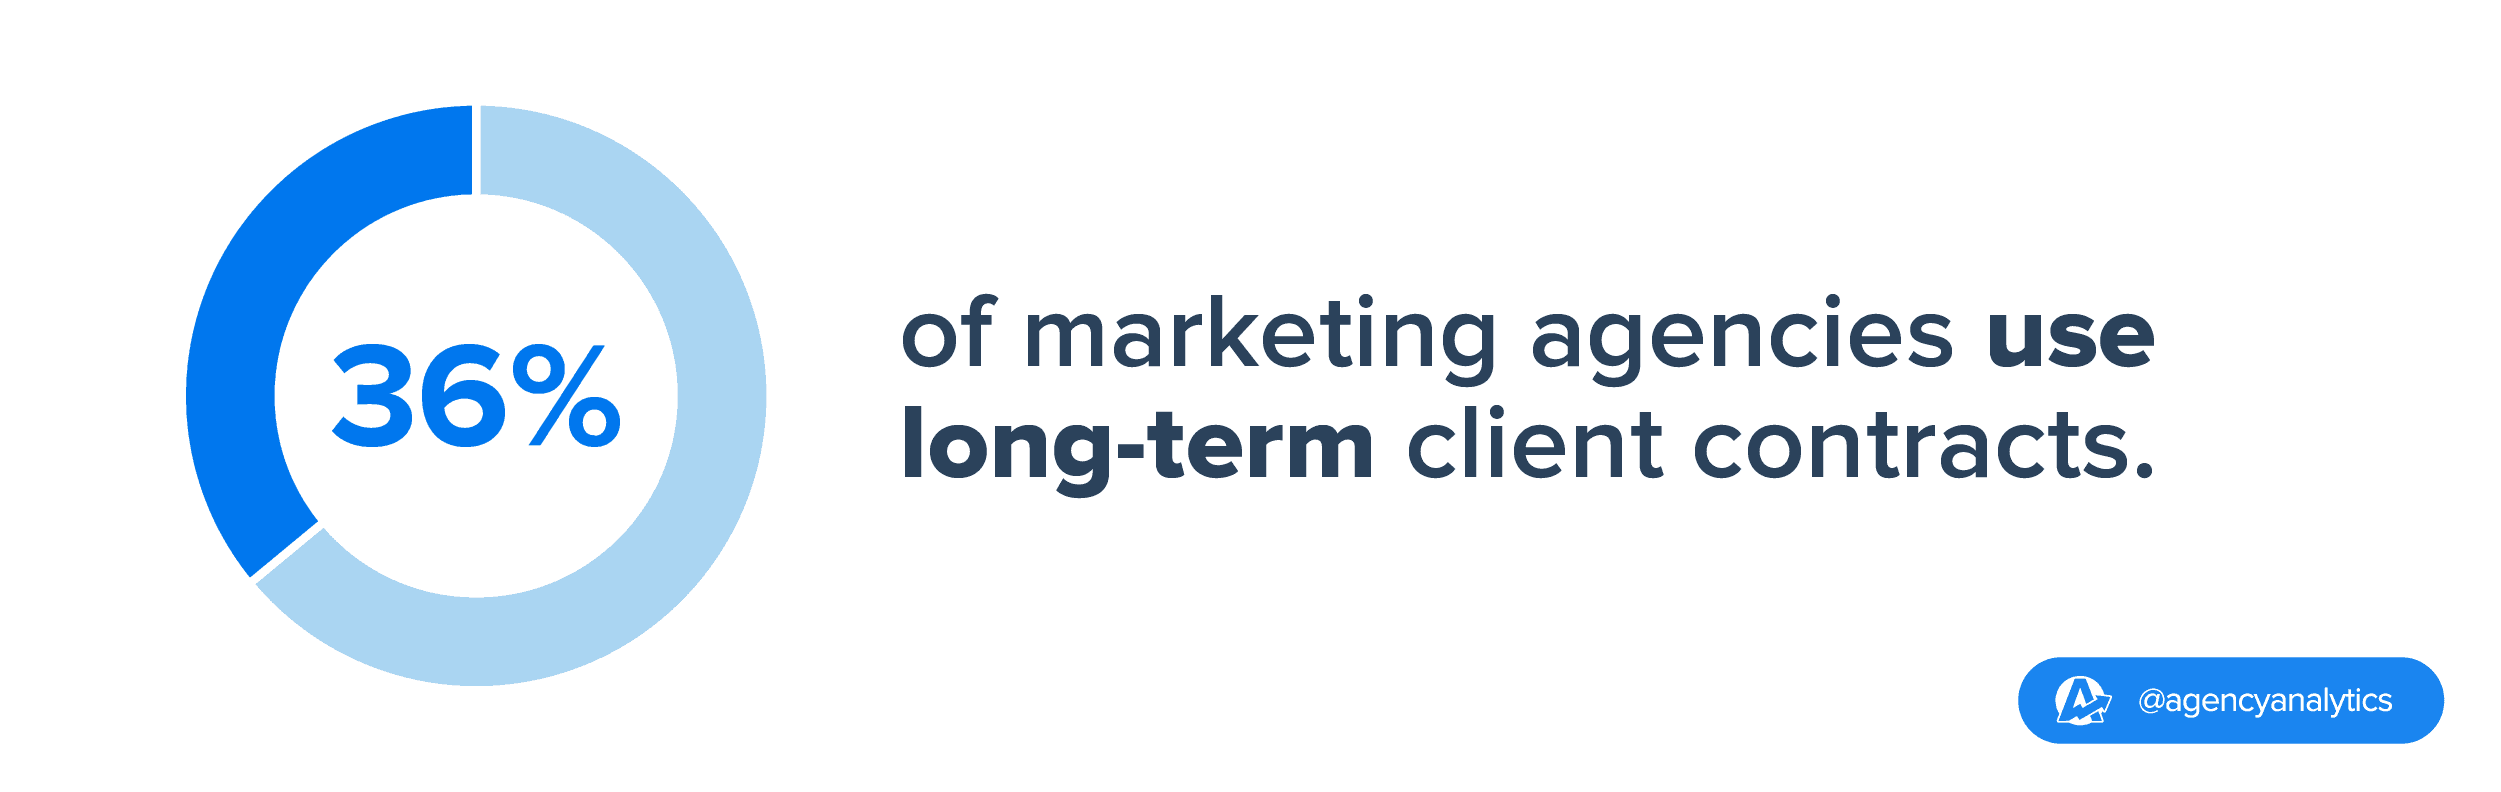 stat showing client contract type used by marketing agencies